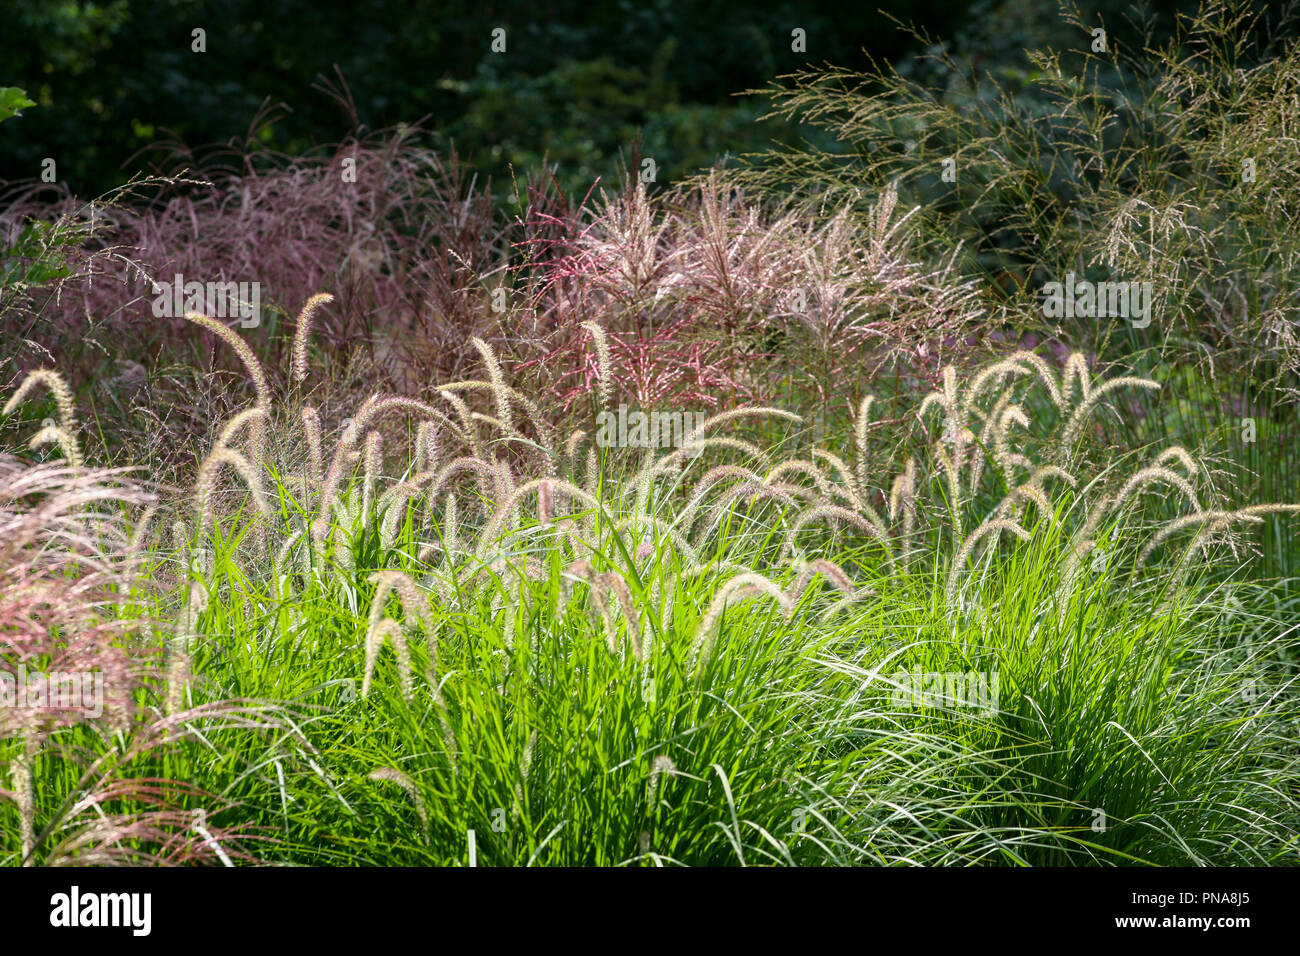 Ornamental grasses in a garden - Pennisetum 'Fairy Tails' with Miscanthus and Molinia in the background Stock Photo